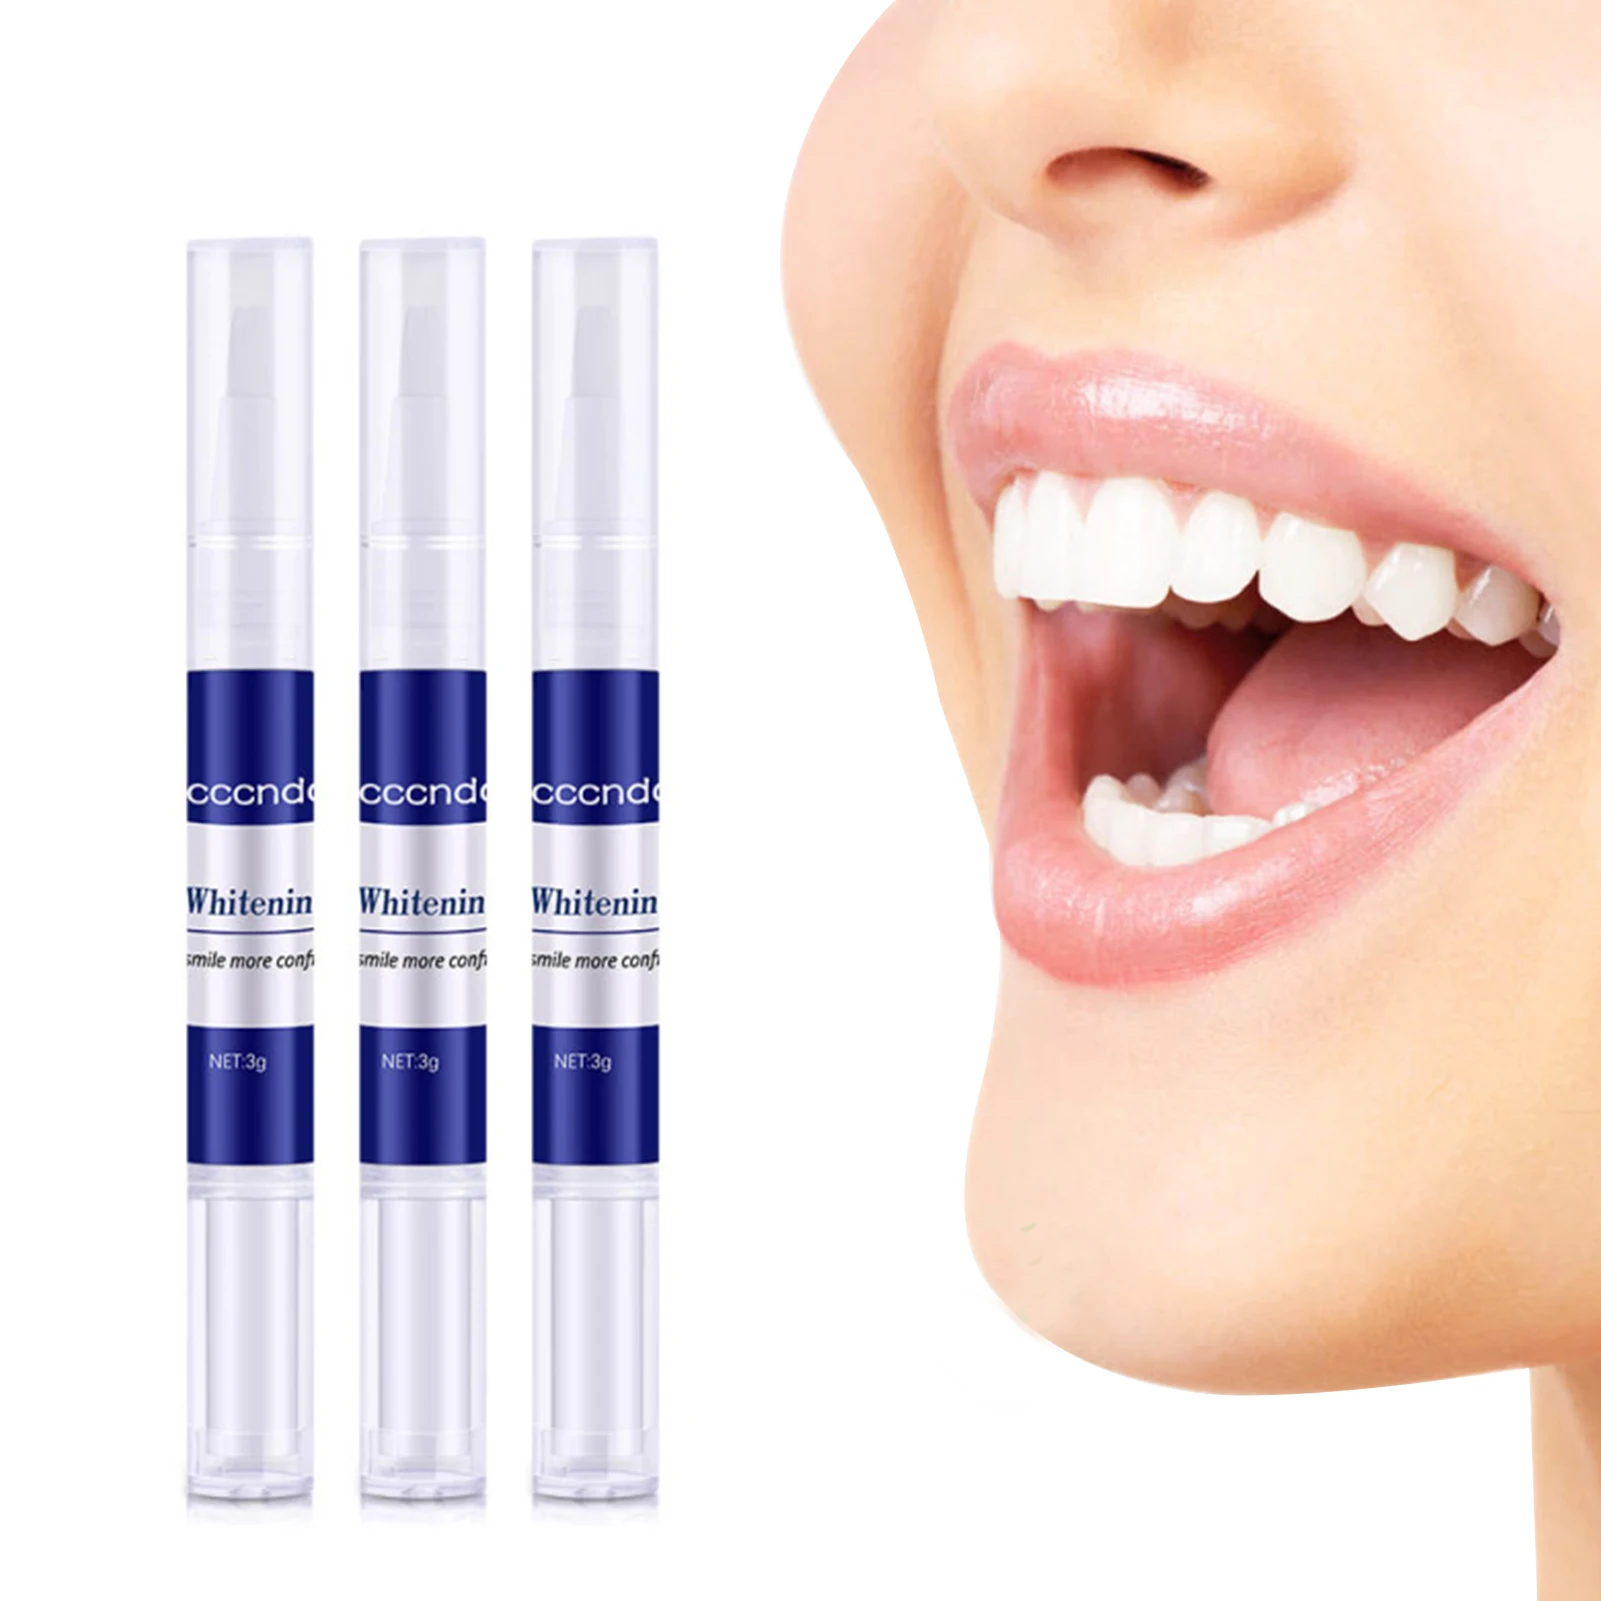 

3pcs Teeth Whitening Pen Gel Liquid Oral Hygiene Cleaning Whiten Tooth Lotion Remove Oral Odor Plaques Dental Bleach Care Tools